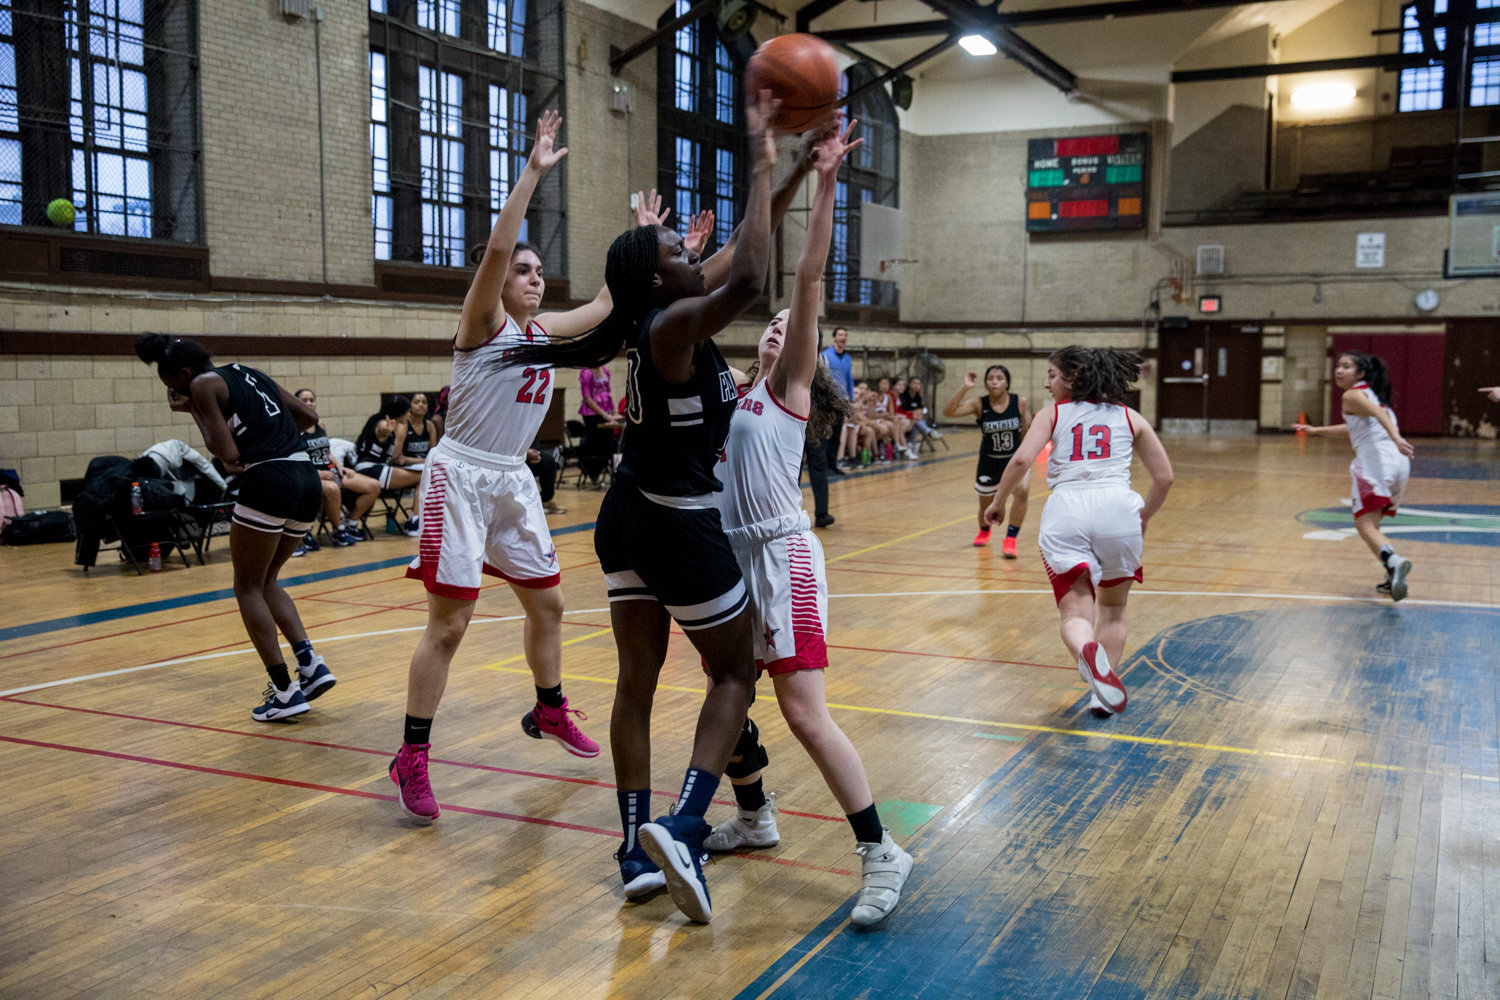 American Studies’ seniors Emily Eljamal (22) and Jacqui Harari put up their best defense against Achievement First Brooklyn, but it wasn’t enough to prevent a 67-55 loss.